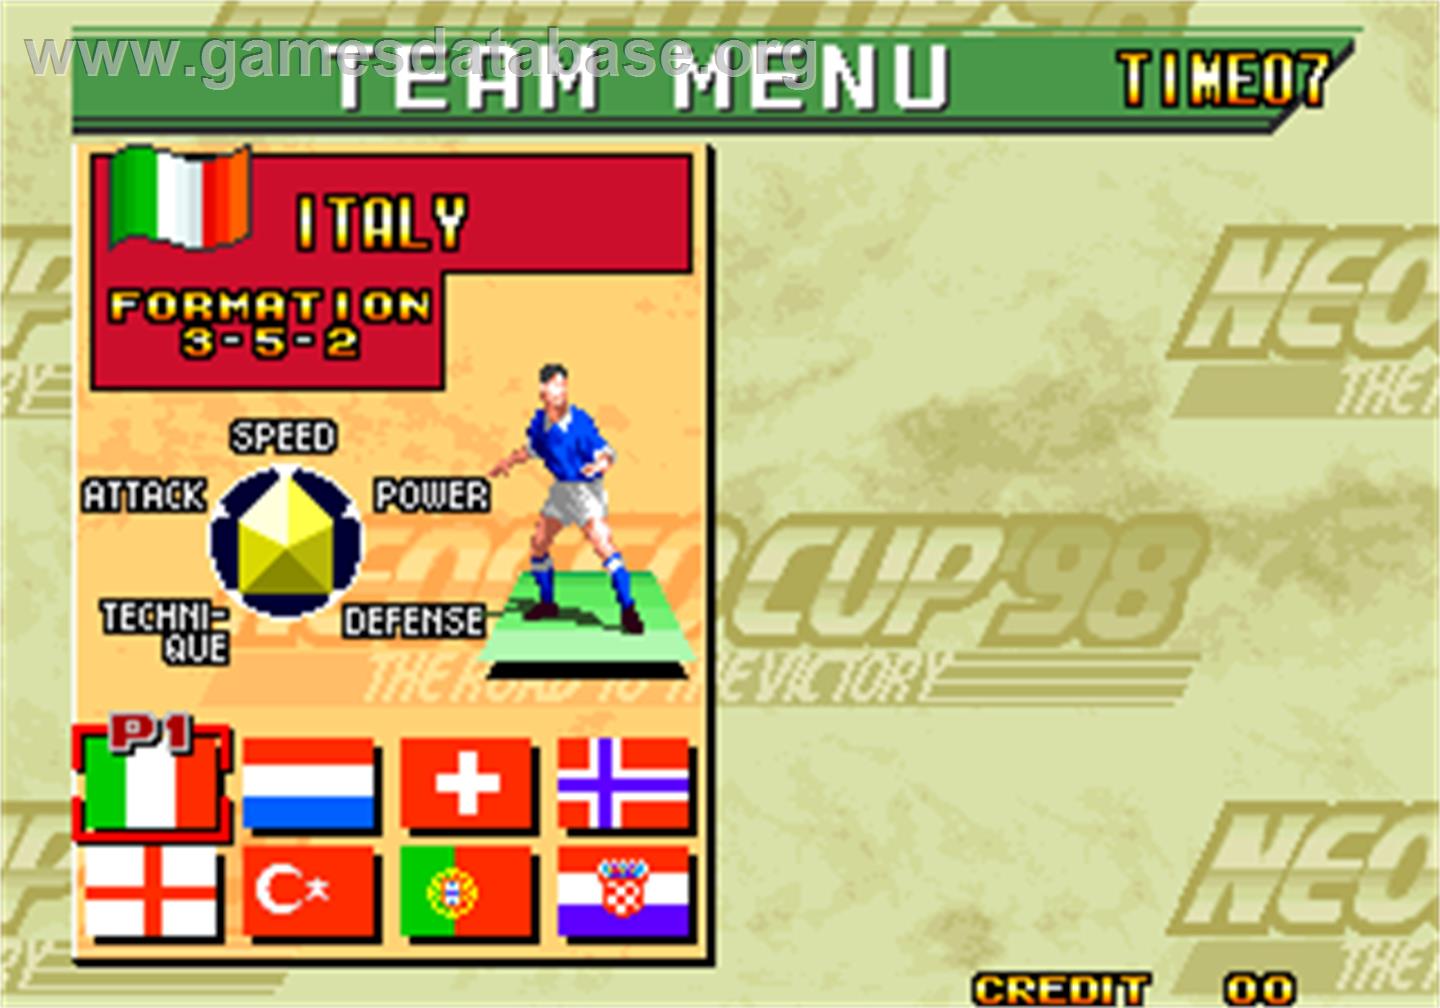 Neo-Geo Cup '98 - The Road to the Victory - Arcade - Artwork - Select Screen